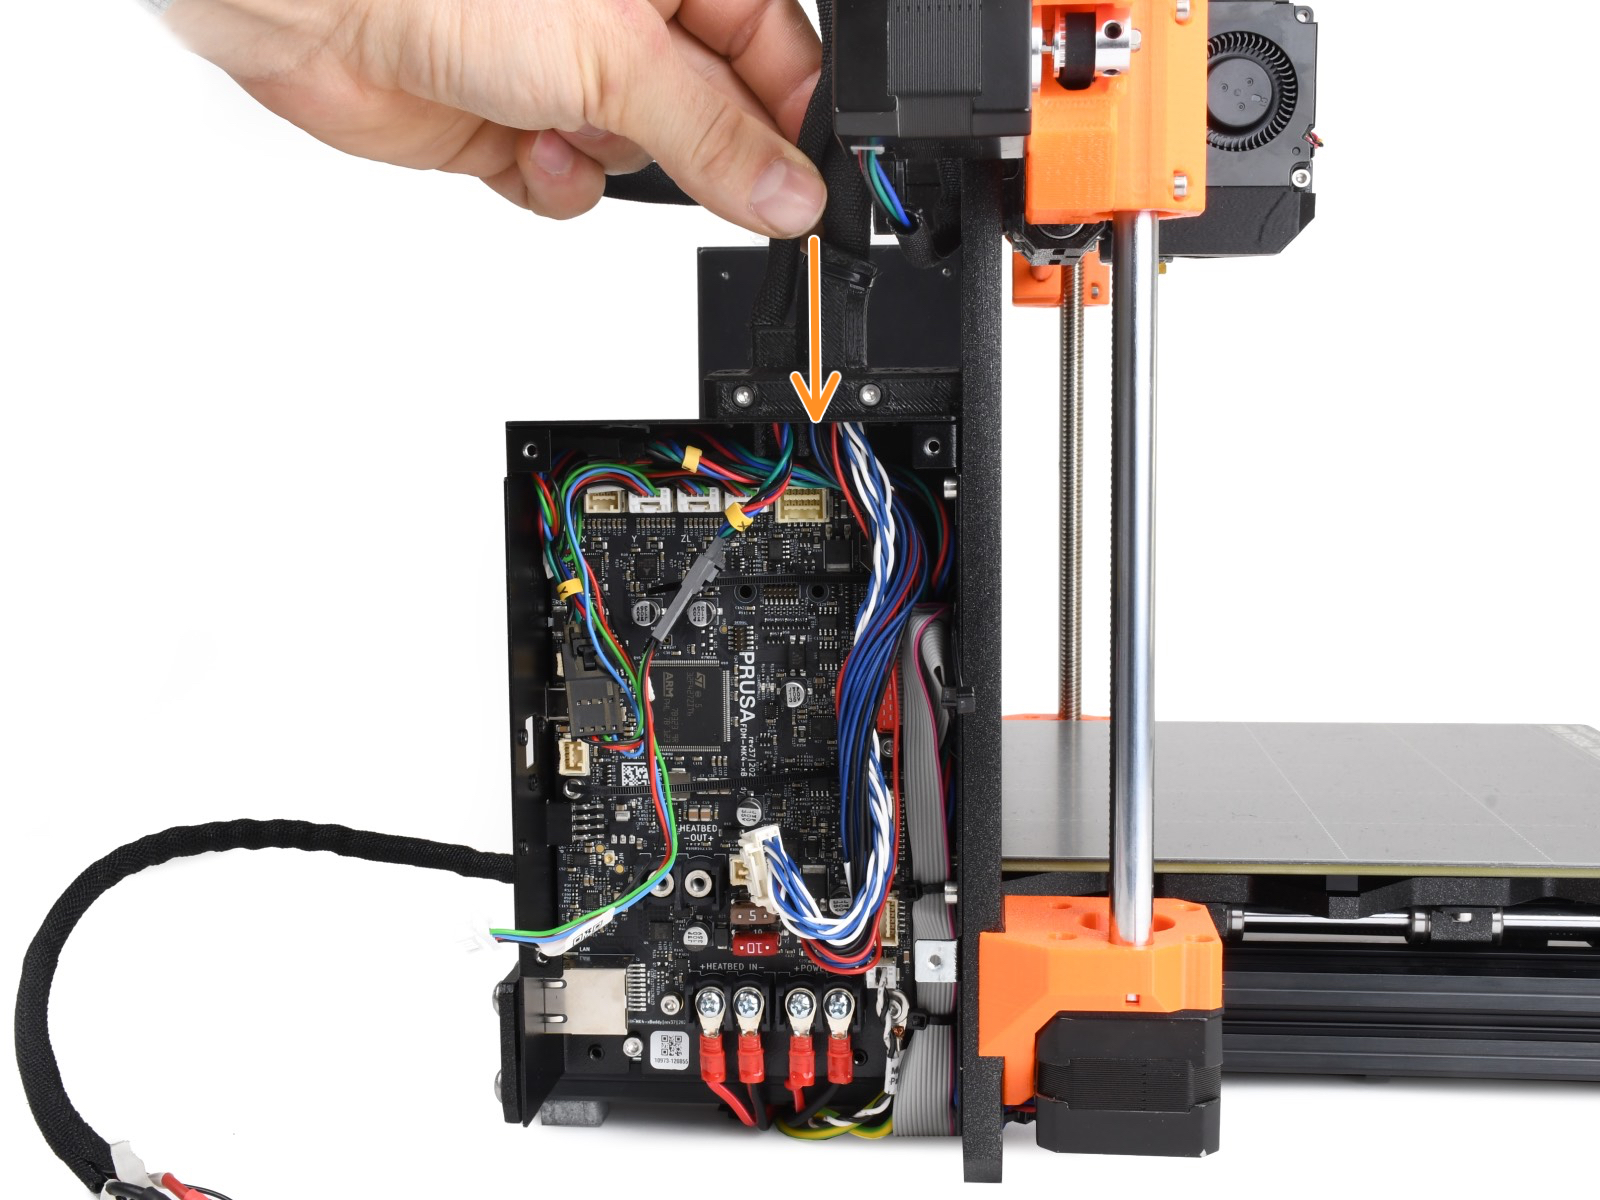 Installing the extruder cable bundle